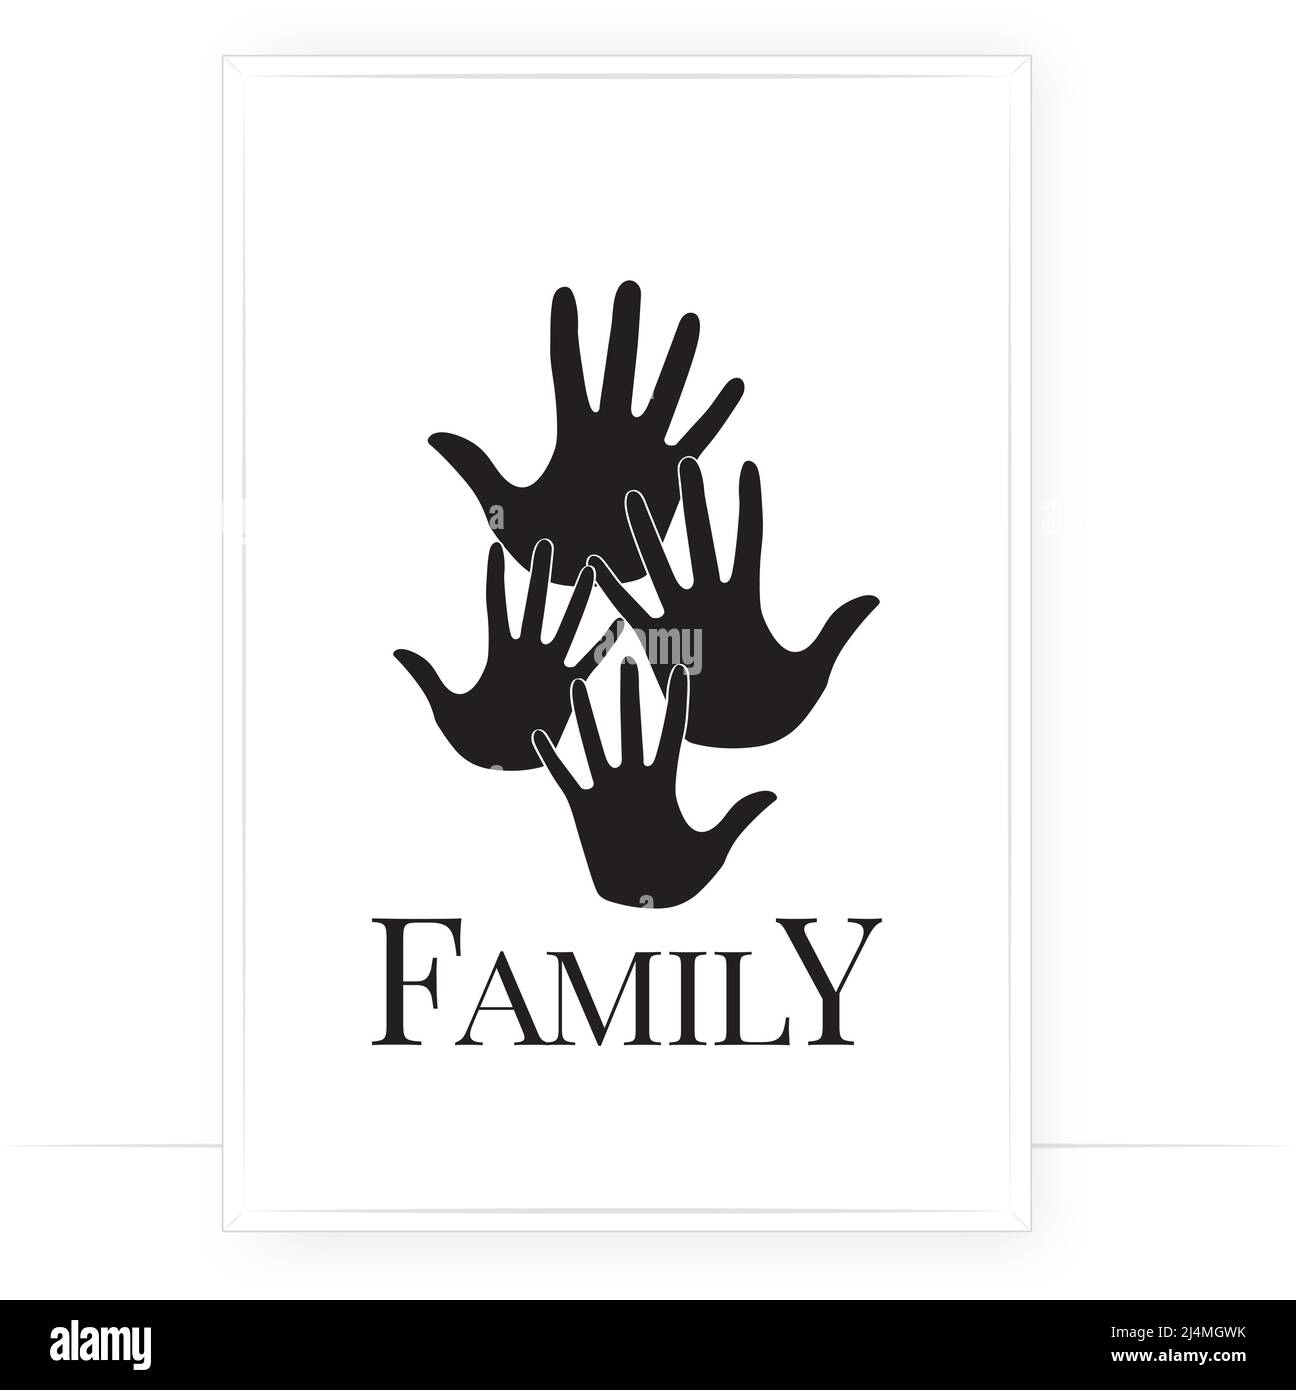 Family, vector. Hands silhouettes illustration isolated on white background. Scandinavian minimalist poster design Stock Vector